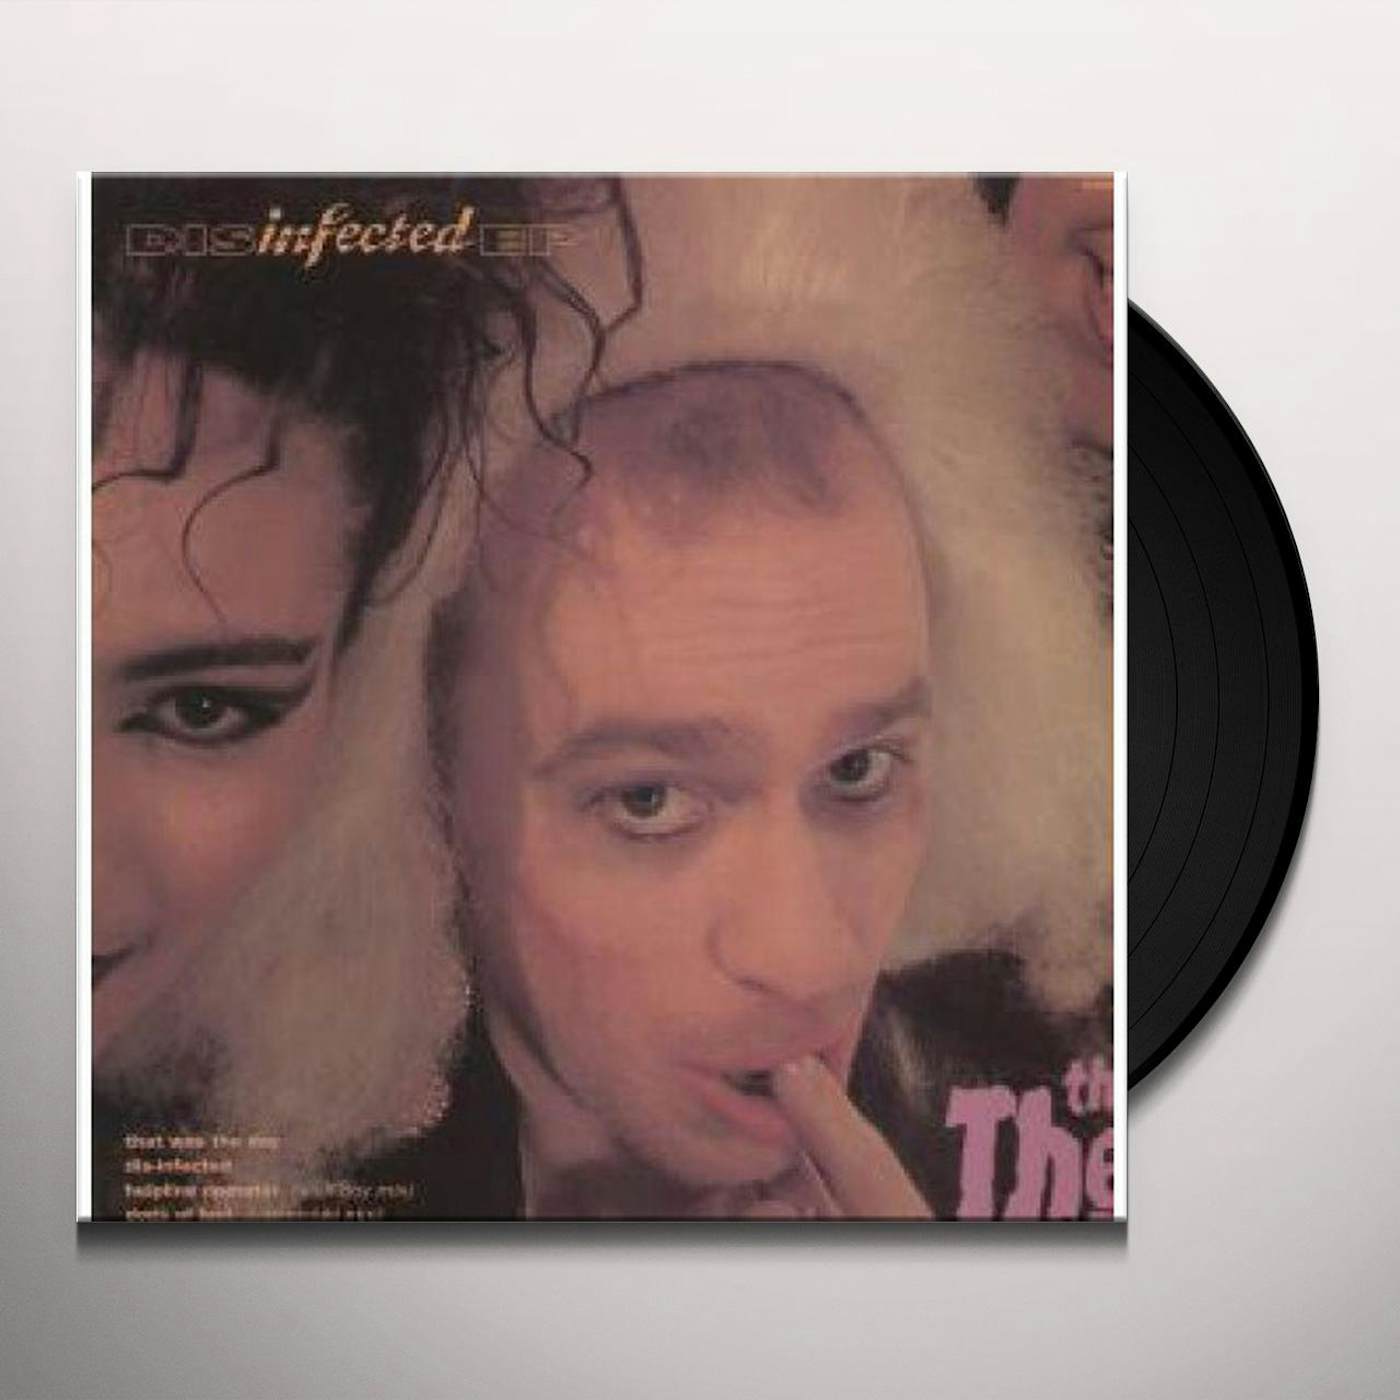 The The DIS-INFECTED Vinyl Record